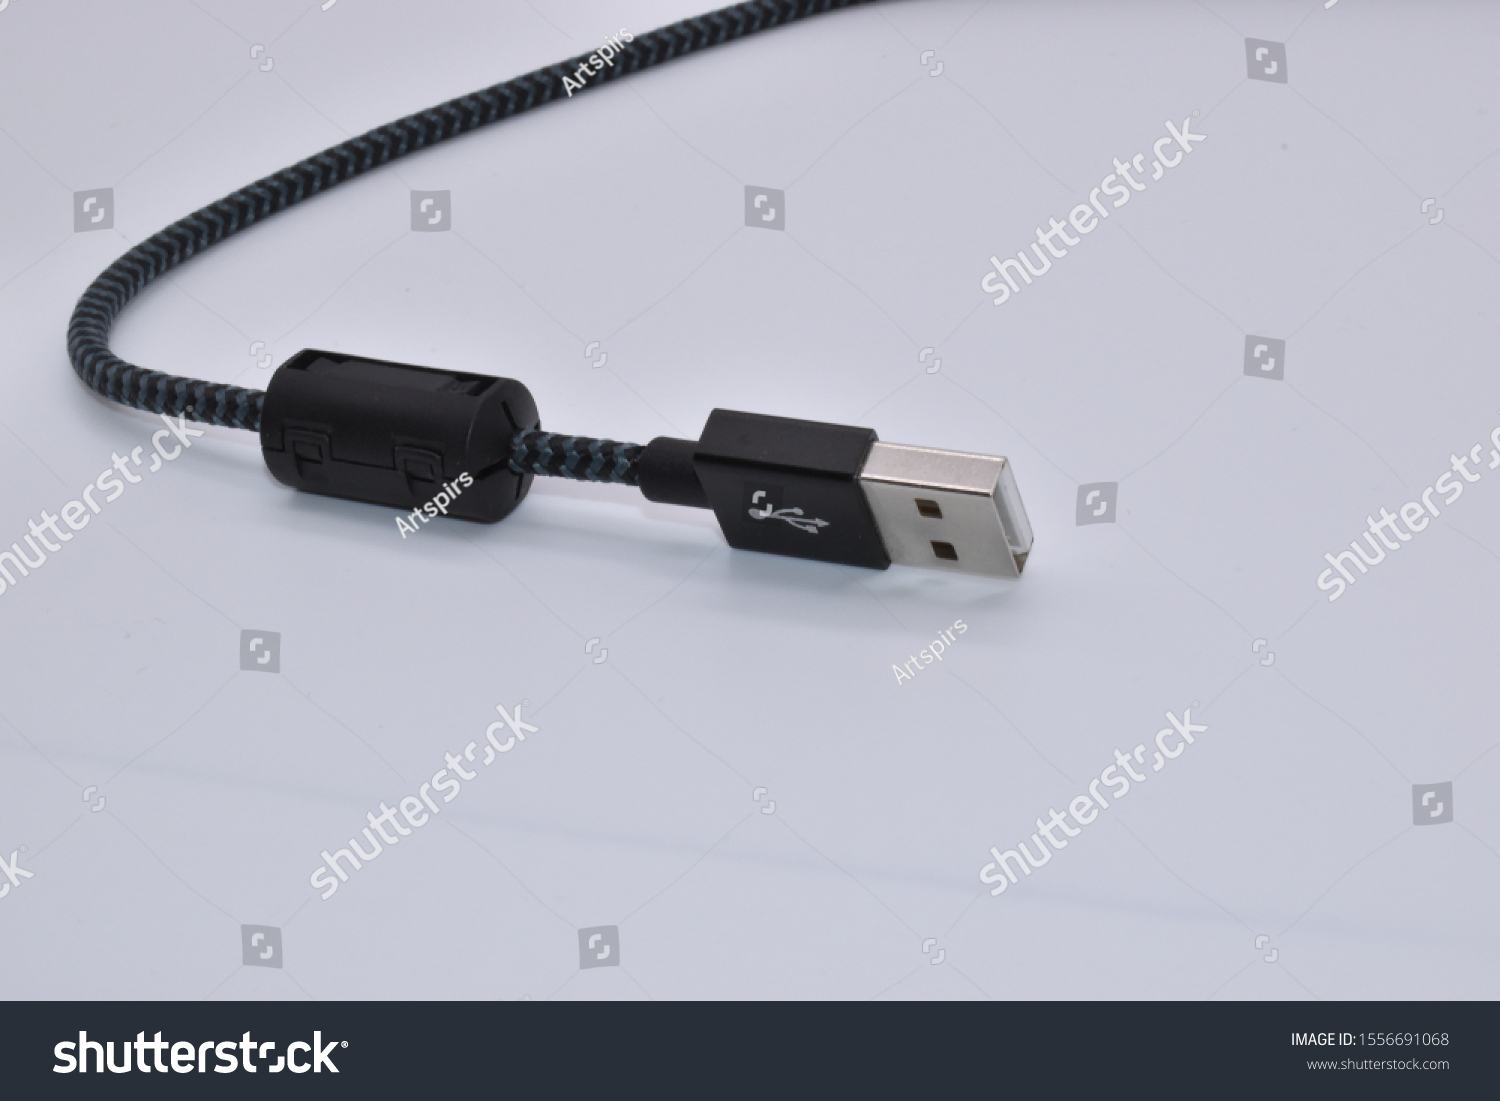 Ferrite for EMI suppression. Ferrite Clamp on USB Cable Type C and A. perfect for test and measuring purposes in EMC labs. Ferrite chokes. Fastening Pre-fixing for round cables. Clamping protection. #1556691068